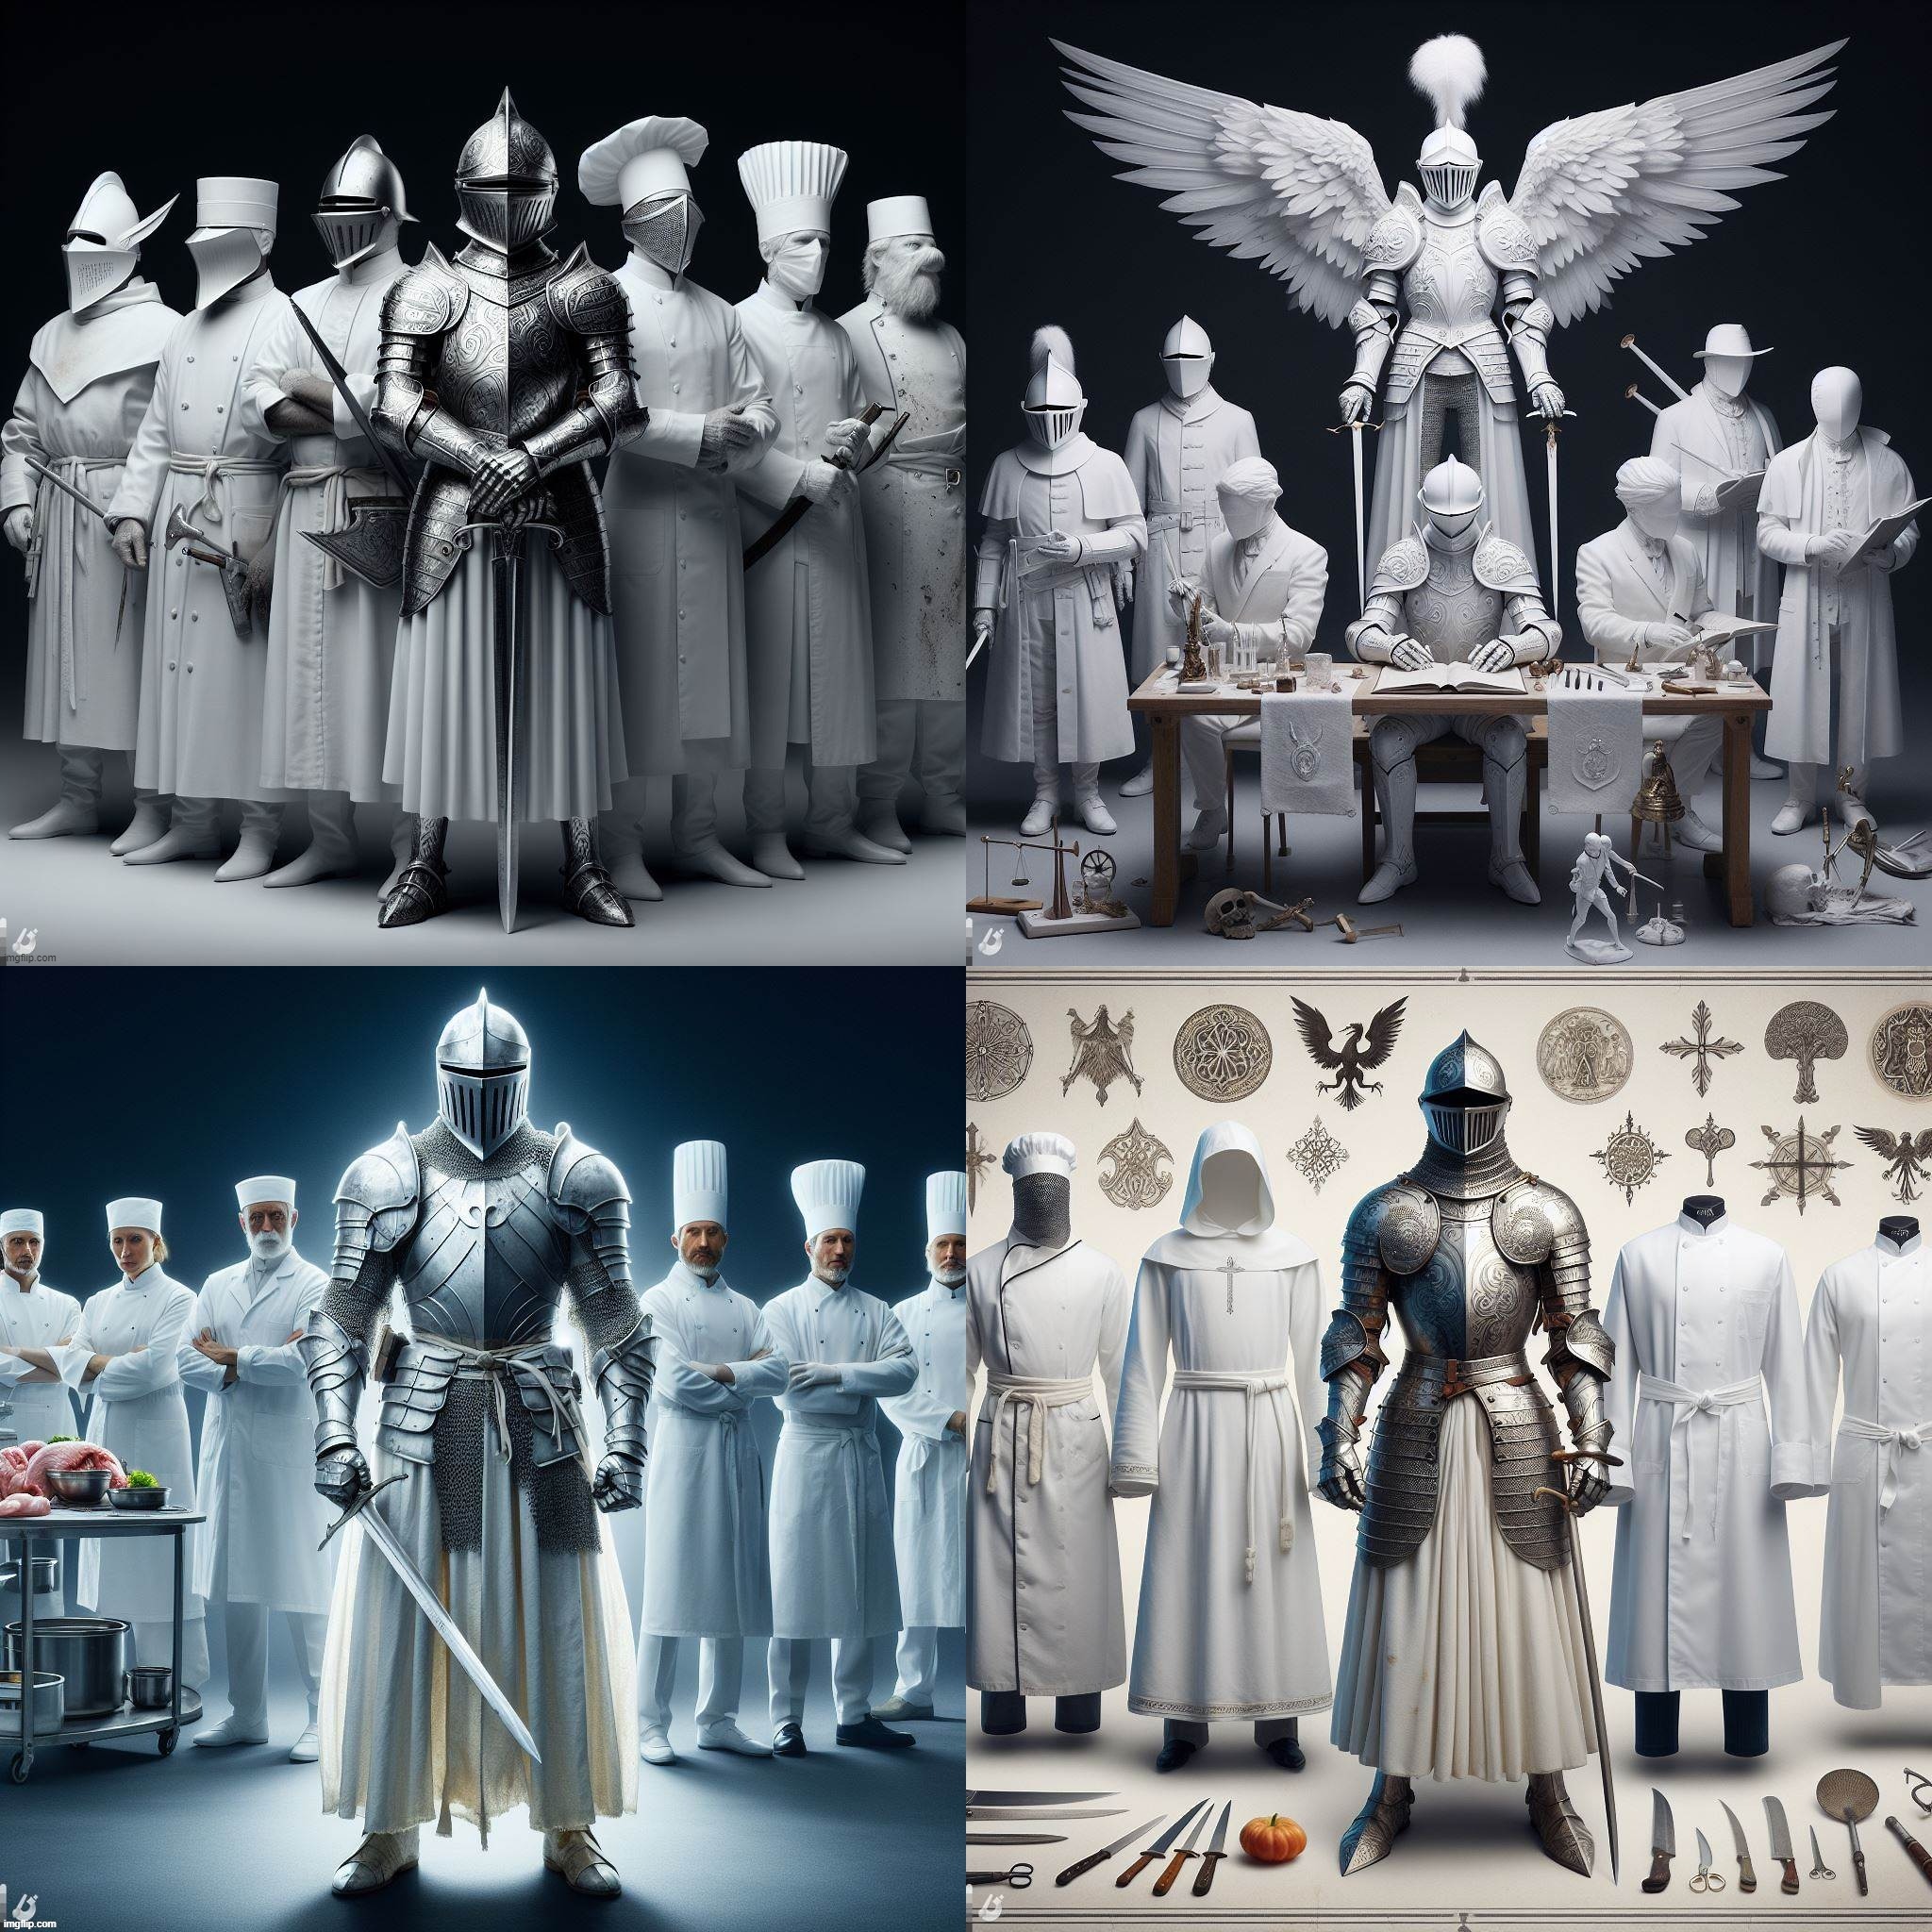 AI Bing: white armor based on Persian Immortal, Knights Templar, 18th cent French White Coats, Scientists, Surgeons & Butchers | image tagged in ai generated,white knight,persia,napoleon,scientists,surgeon | made w/ Imgflip meme maker